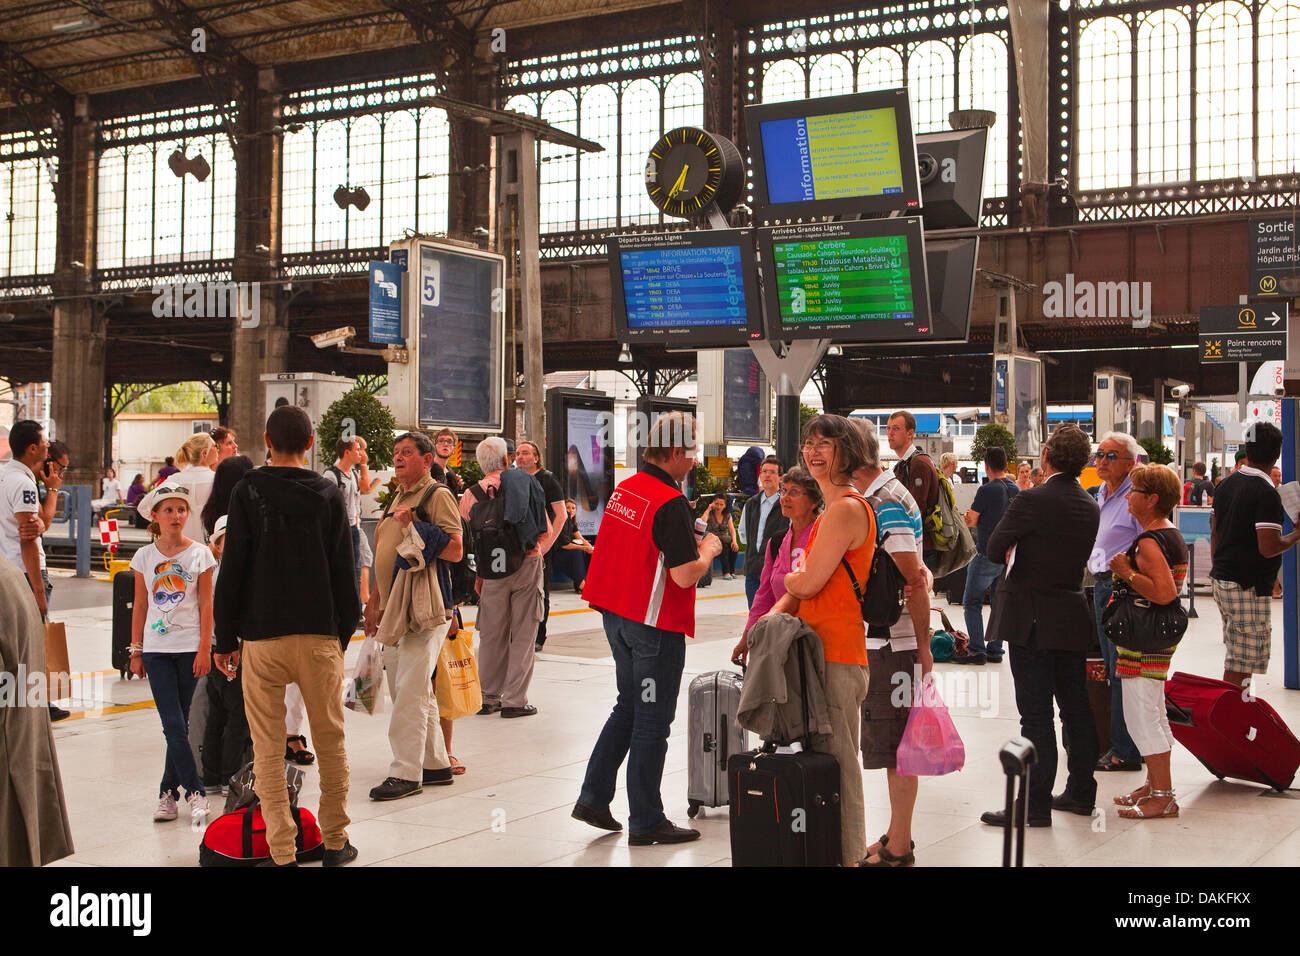 Paris, France. 15th July, 2013. People anxiously wait for information on their trains at Paris Austerlitz railway station as the derailment at Bretigny-sur-Orge continues to cause problems three days on in Paris, France, Monday July 15th, 2013 Credit:  Julian Elliott/Alamy Live News Stock Photo